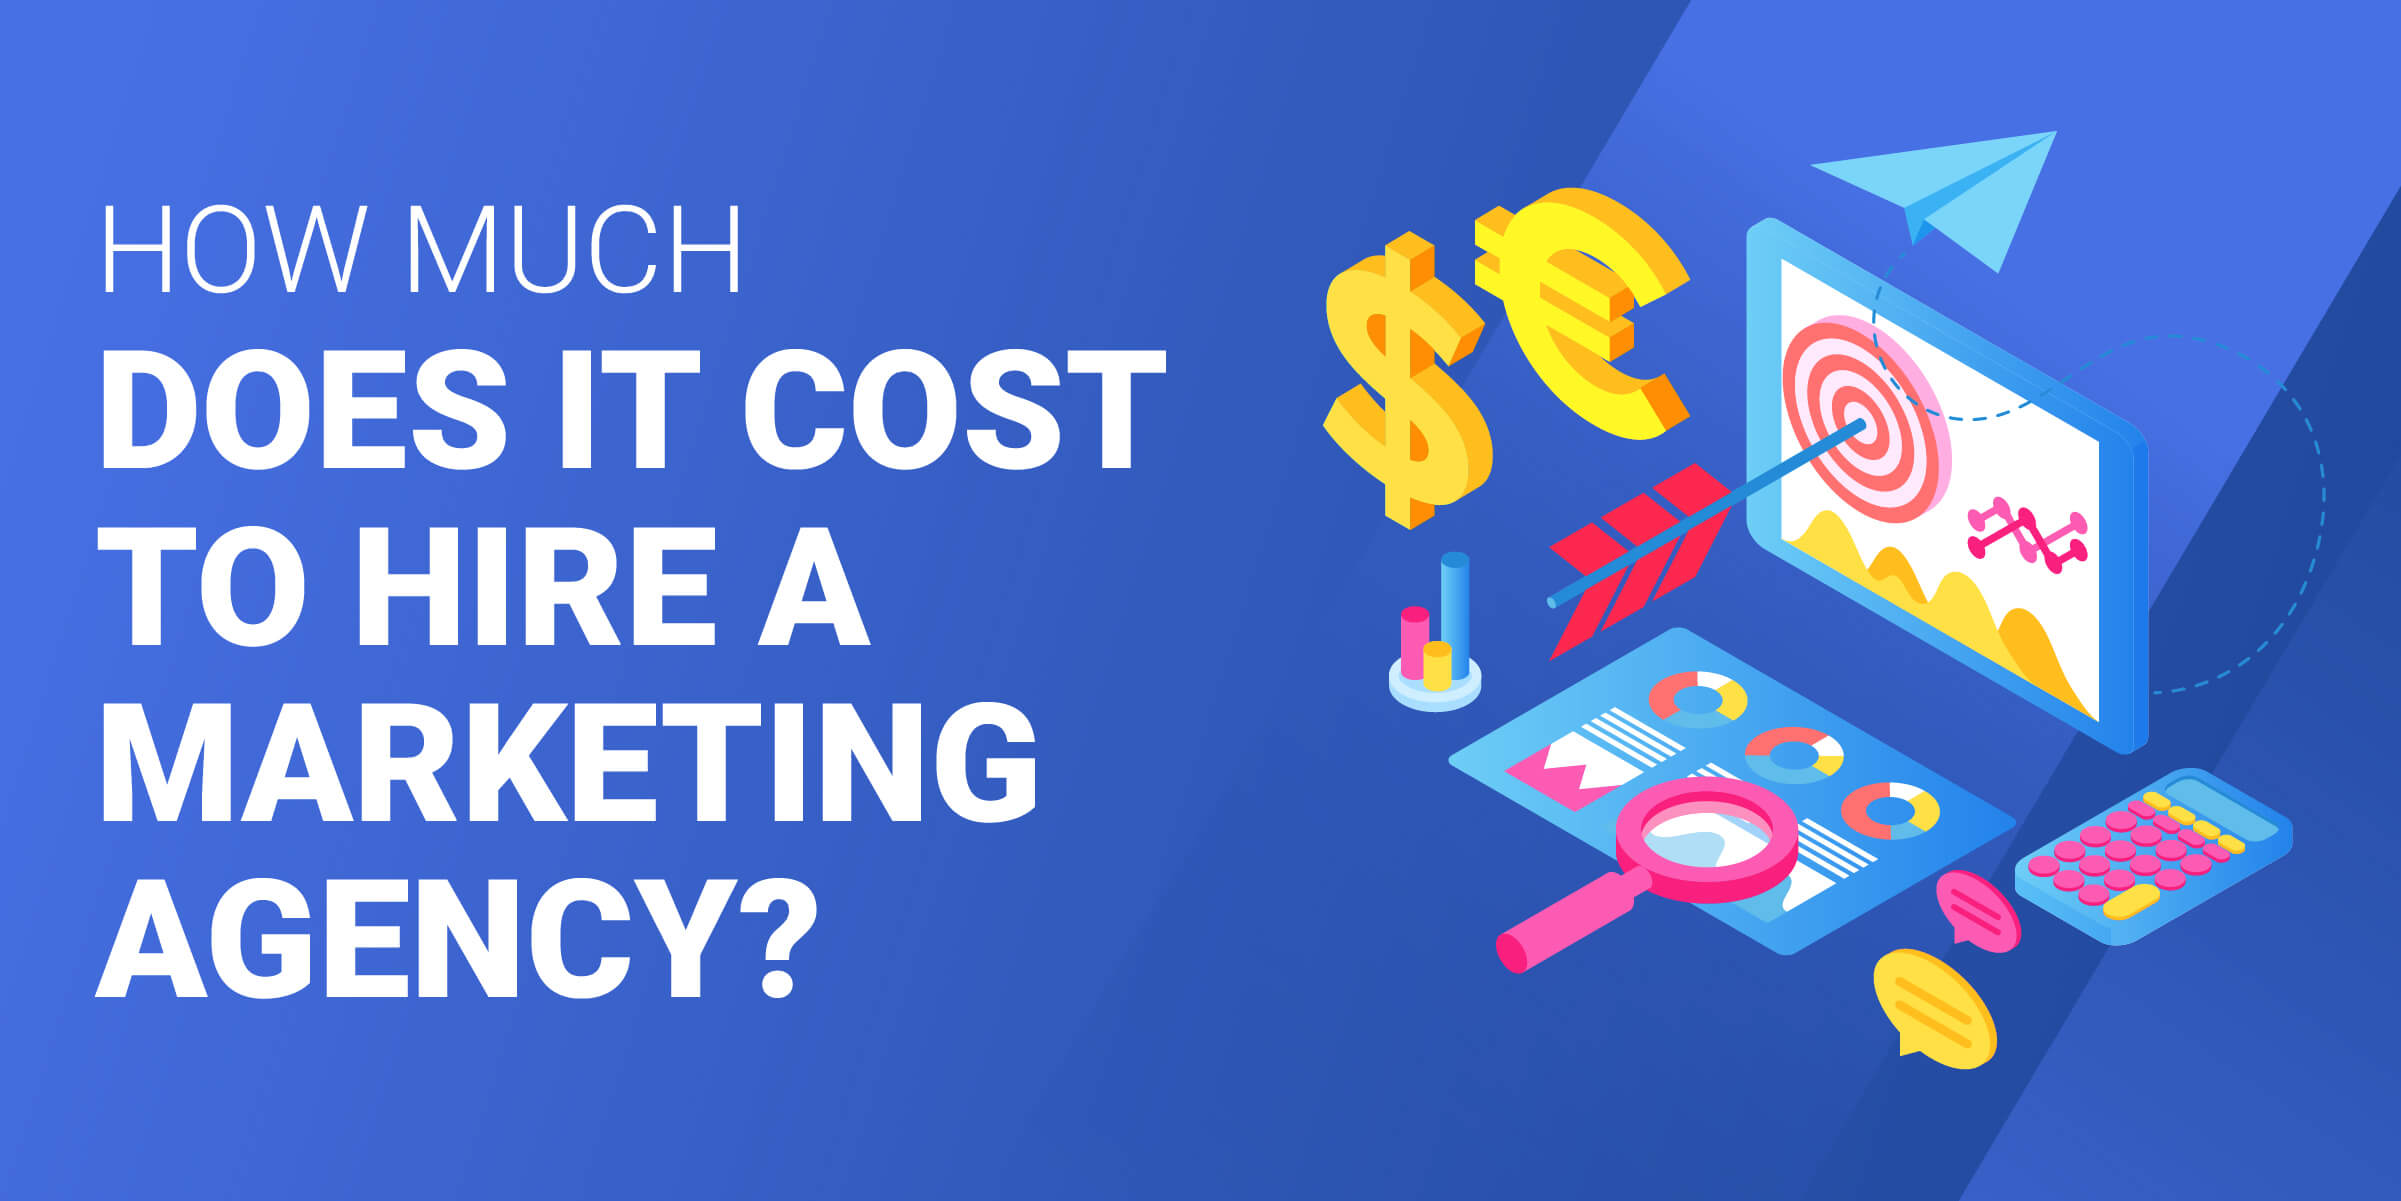 How Much Does It Cost to Hire Marketing Agency